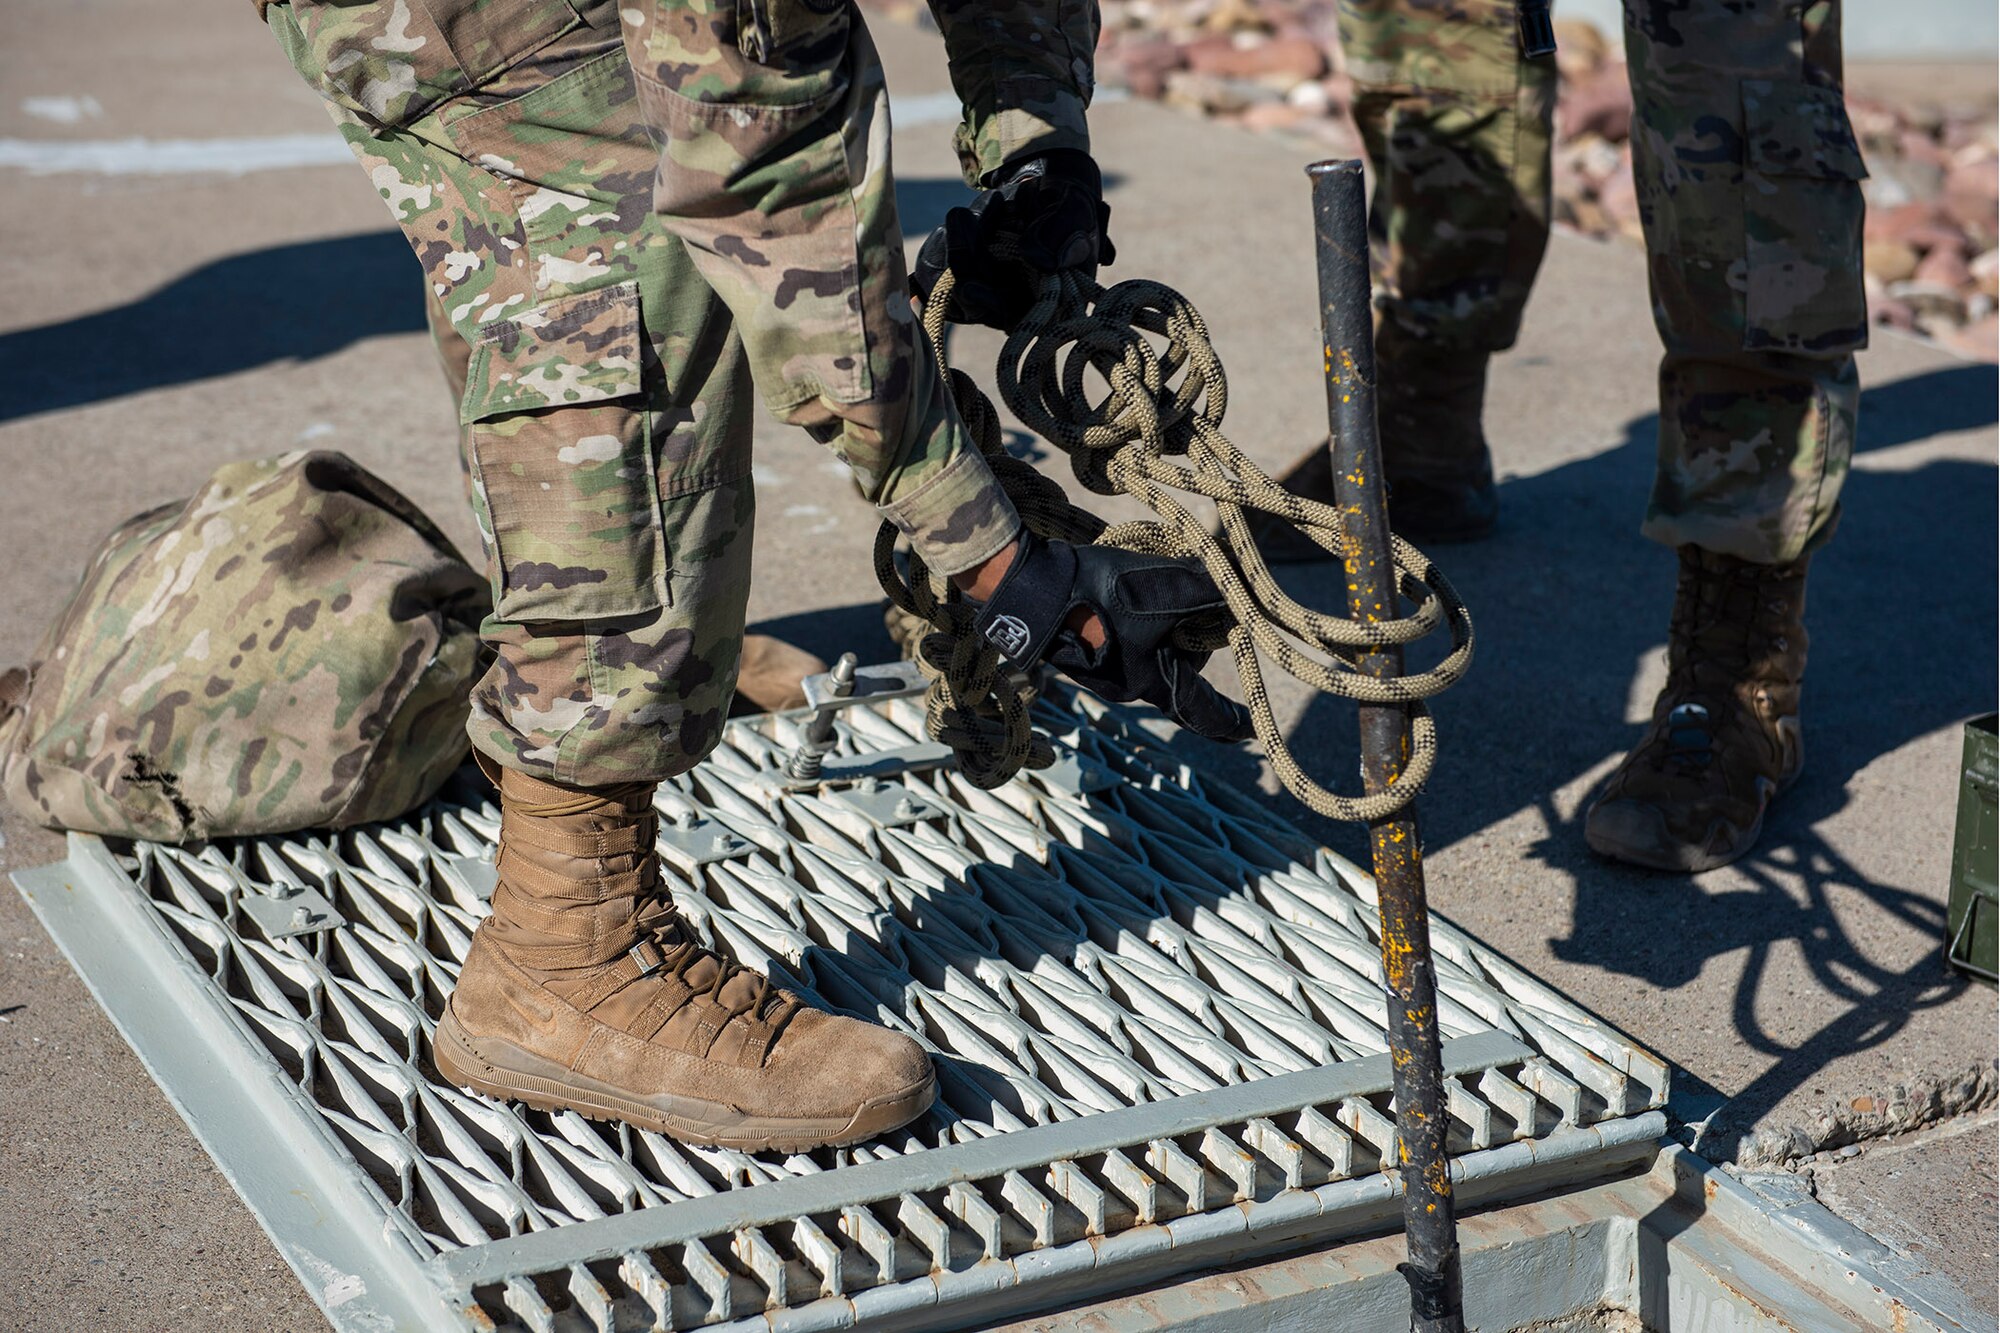 341st Missile Security Operations Squadron tactical response force members prepare wrap rope around a ladder in preparation to rappell during a training exercise April 19, 2022, at a launch facility near Malmstrom Air Force Base, Mont. TRF members assisted 841st Missile Security Forces Squadron personnel during the training exercise to improve interoperability in combat scenarios. (U.S. Air Force photo by Airman 1st Class Elijah Van Zandt)